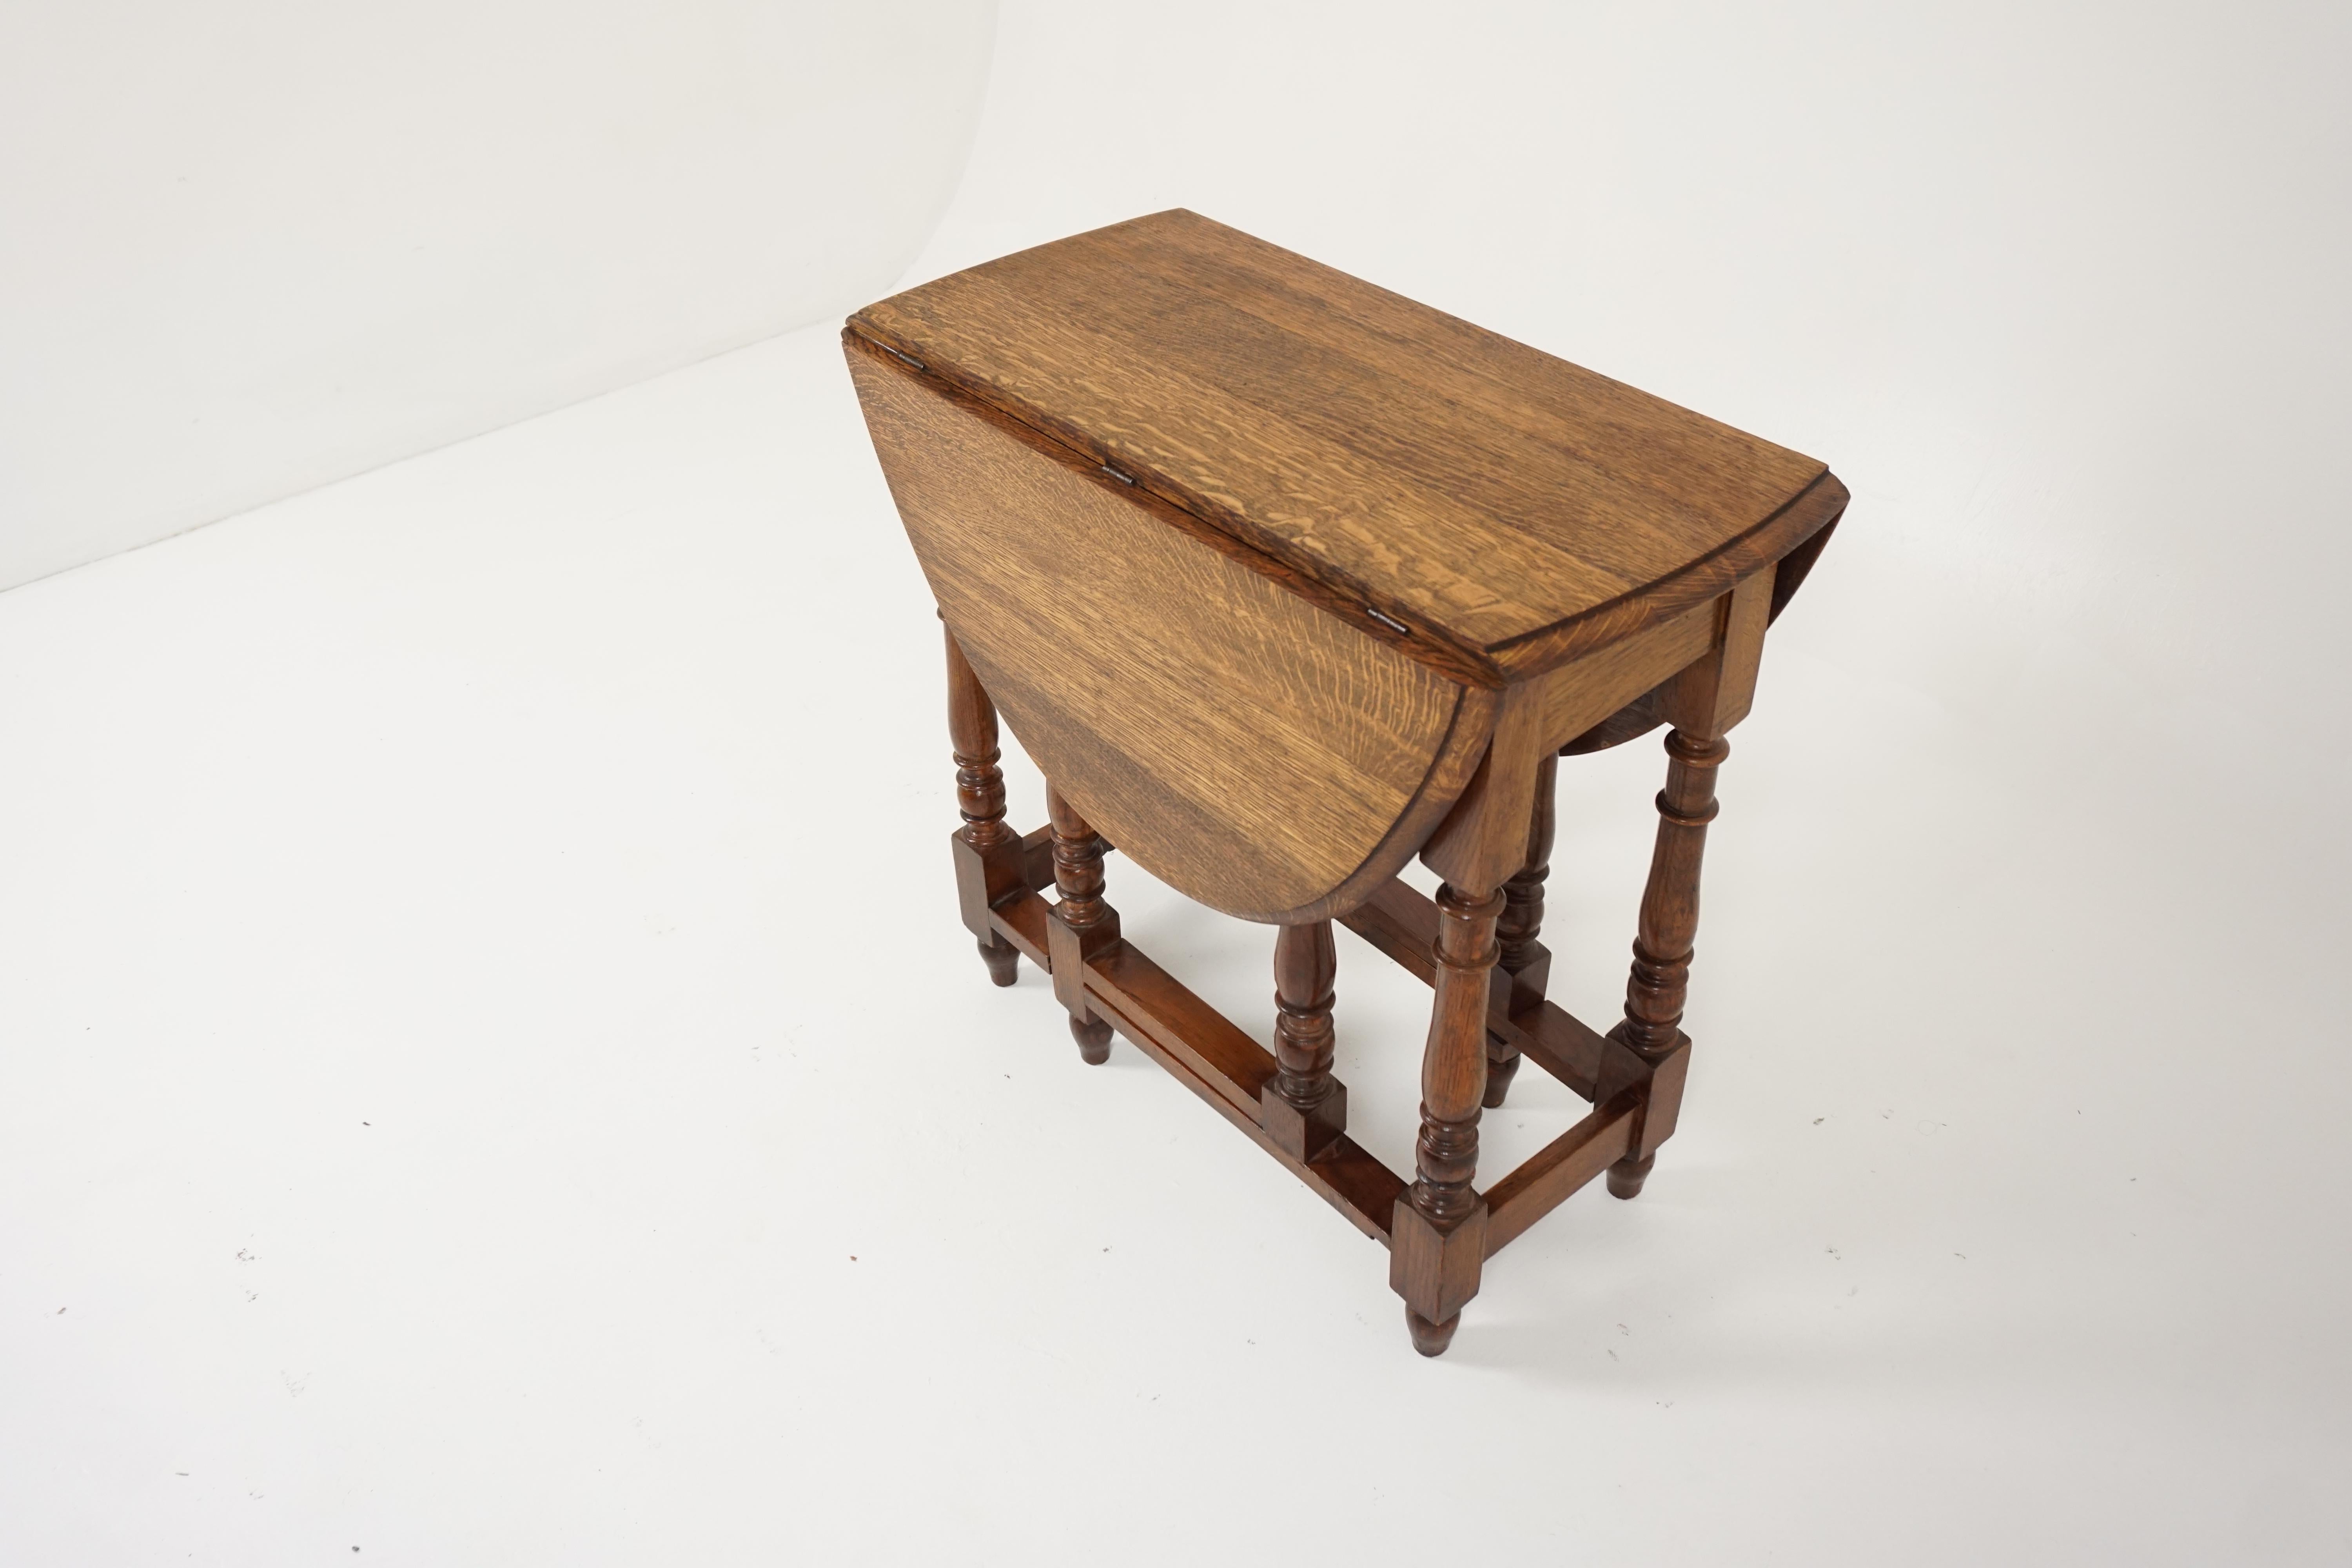 Antique gateleg table, tiger oak drop-leaf table, antique furniture, Scotland, 1910

Scotland, 1910
Solid oak
Original finish
Rectangular top
Pair of drop leaves to the side
Standing on turned supports
Joined by stretchers 
Very clean and